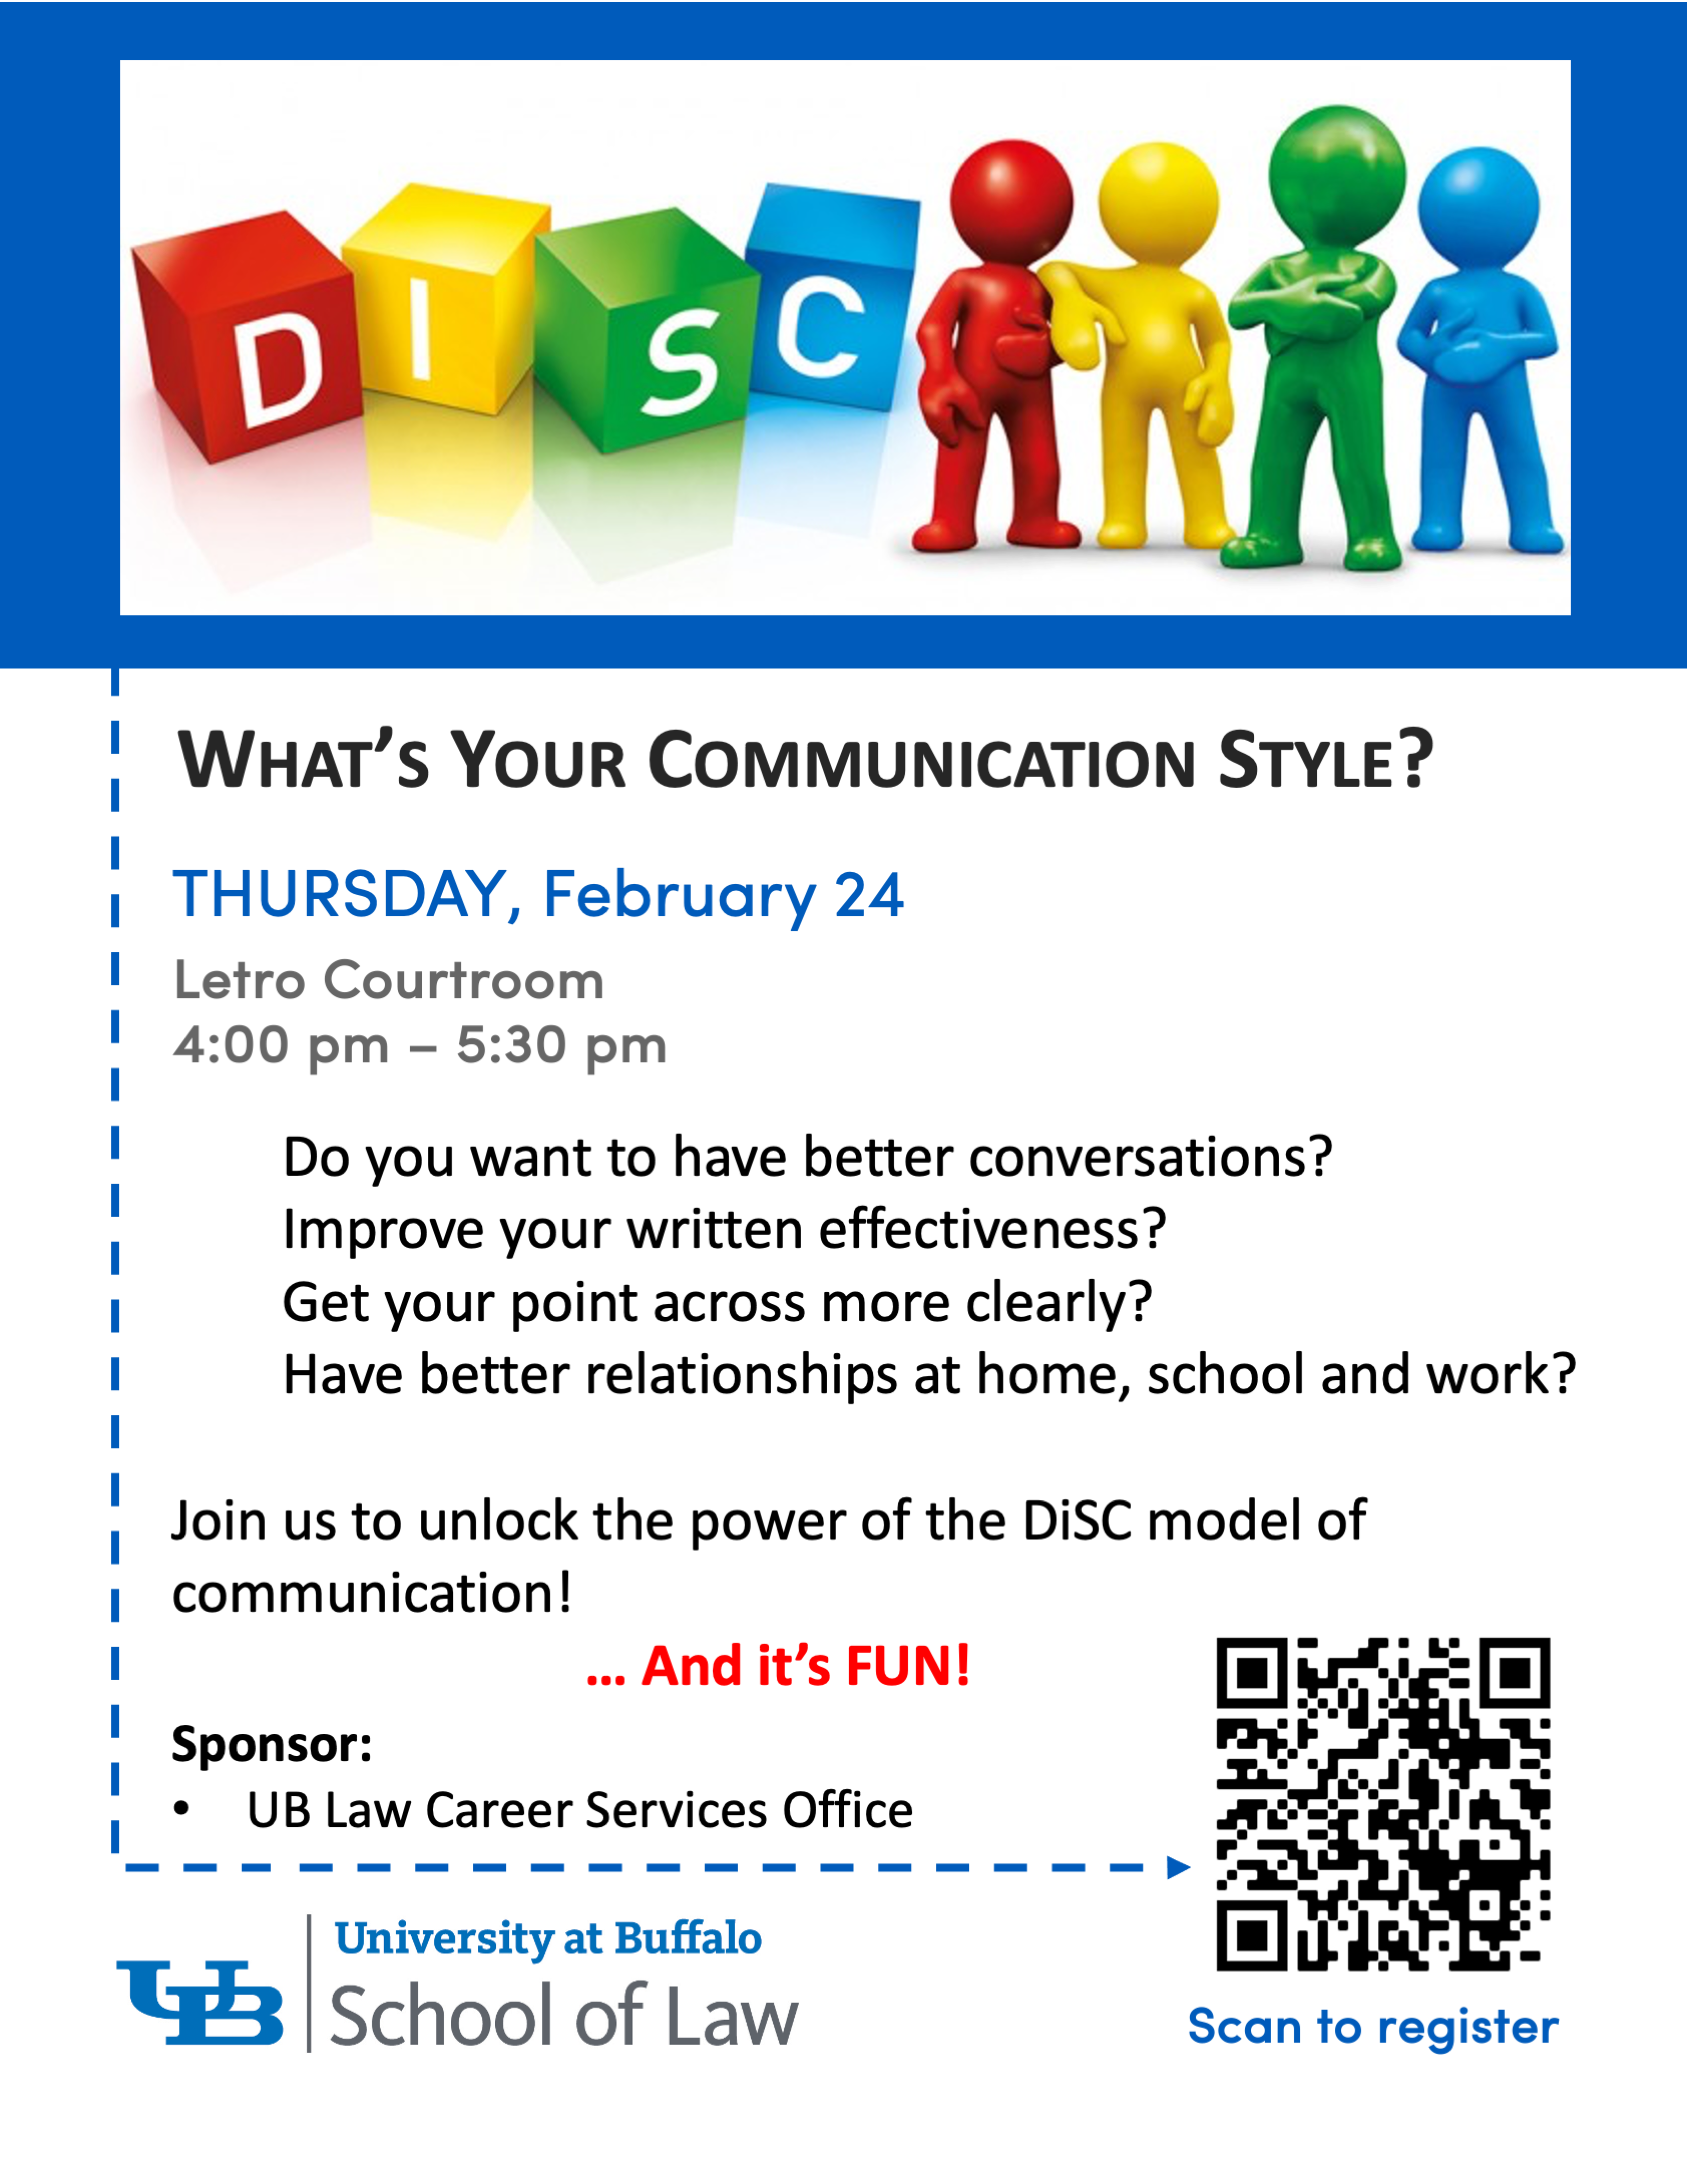 Ub Calendar 2022 Ub Events Calendar - 12 Weeks Of Wellness For Spring 2022: Self-Awareness -  Disc: What's Your Communication Style?